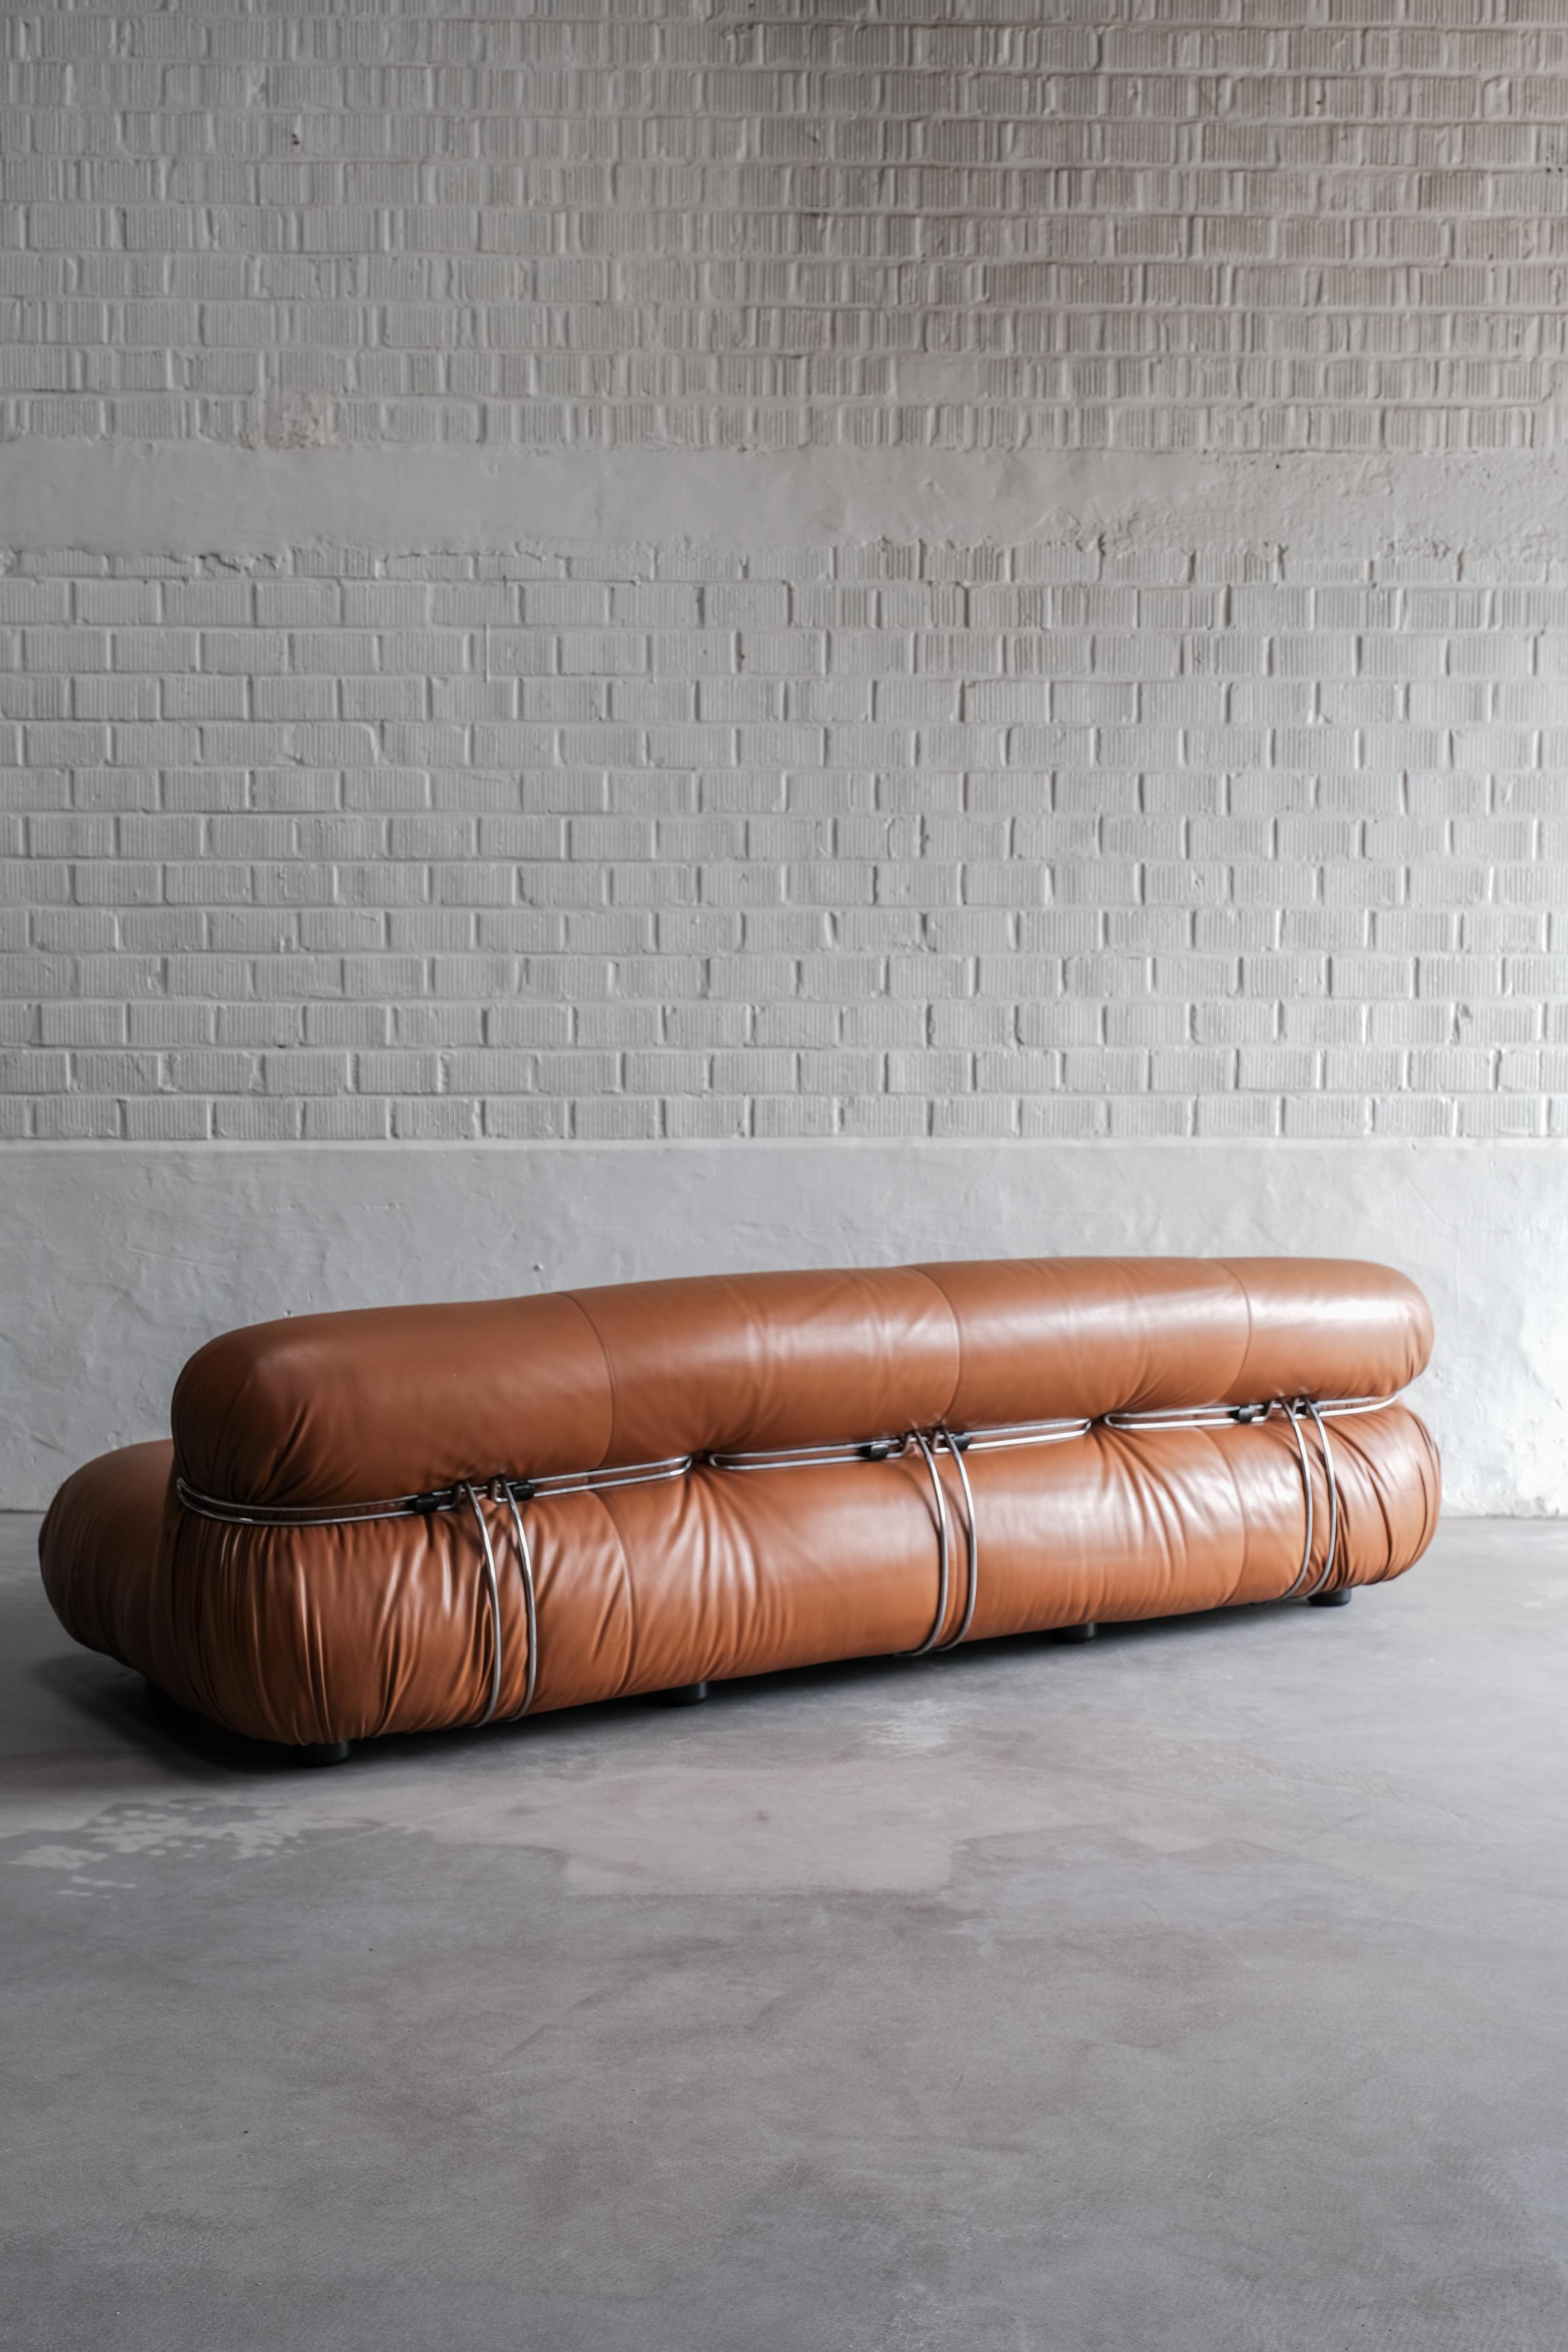 Soriana 4 seater in Cognac leather designed by Afra&Tobia Scarpa or Cassina 70' 3